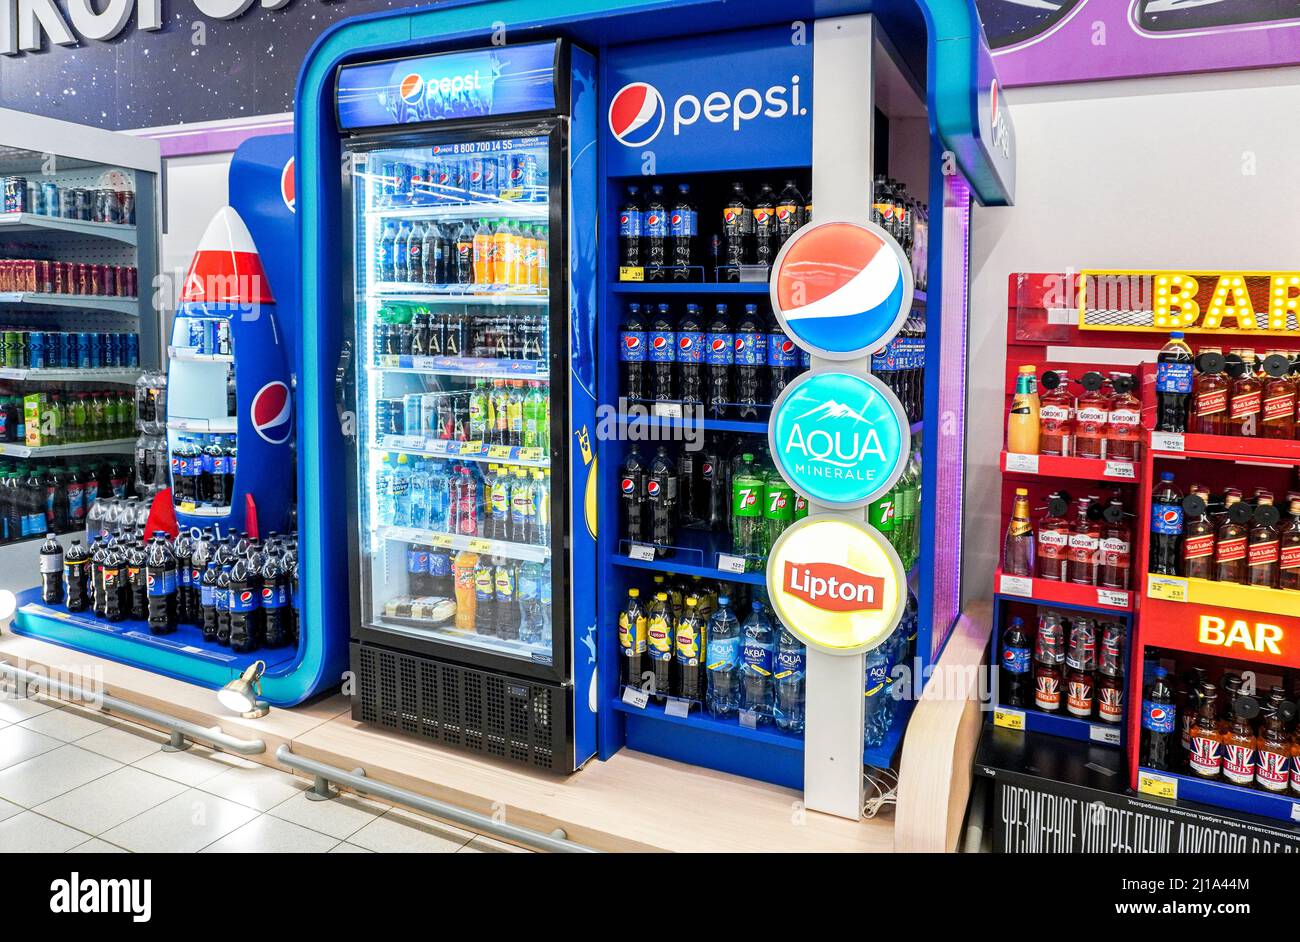 Samara, Russia - March 12, 2022: Bottles of Pepsi Cola ahd other beverages on the store shelf Stock Photo